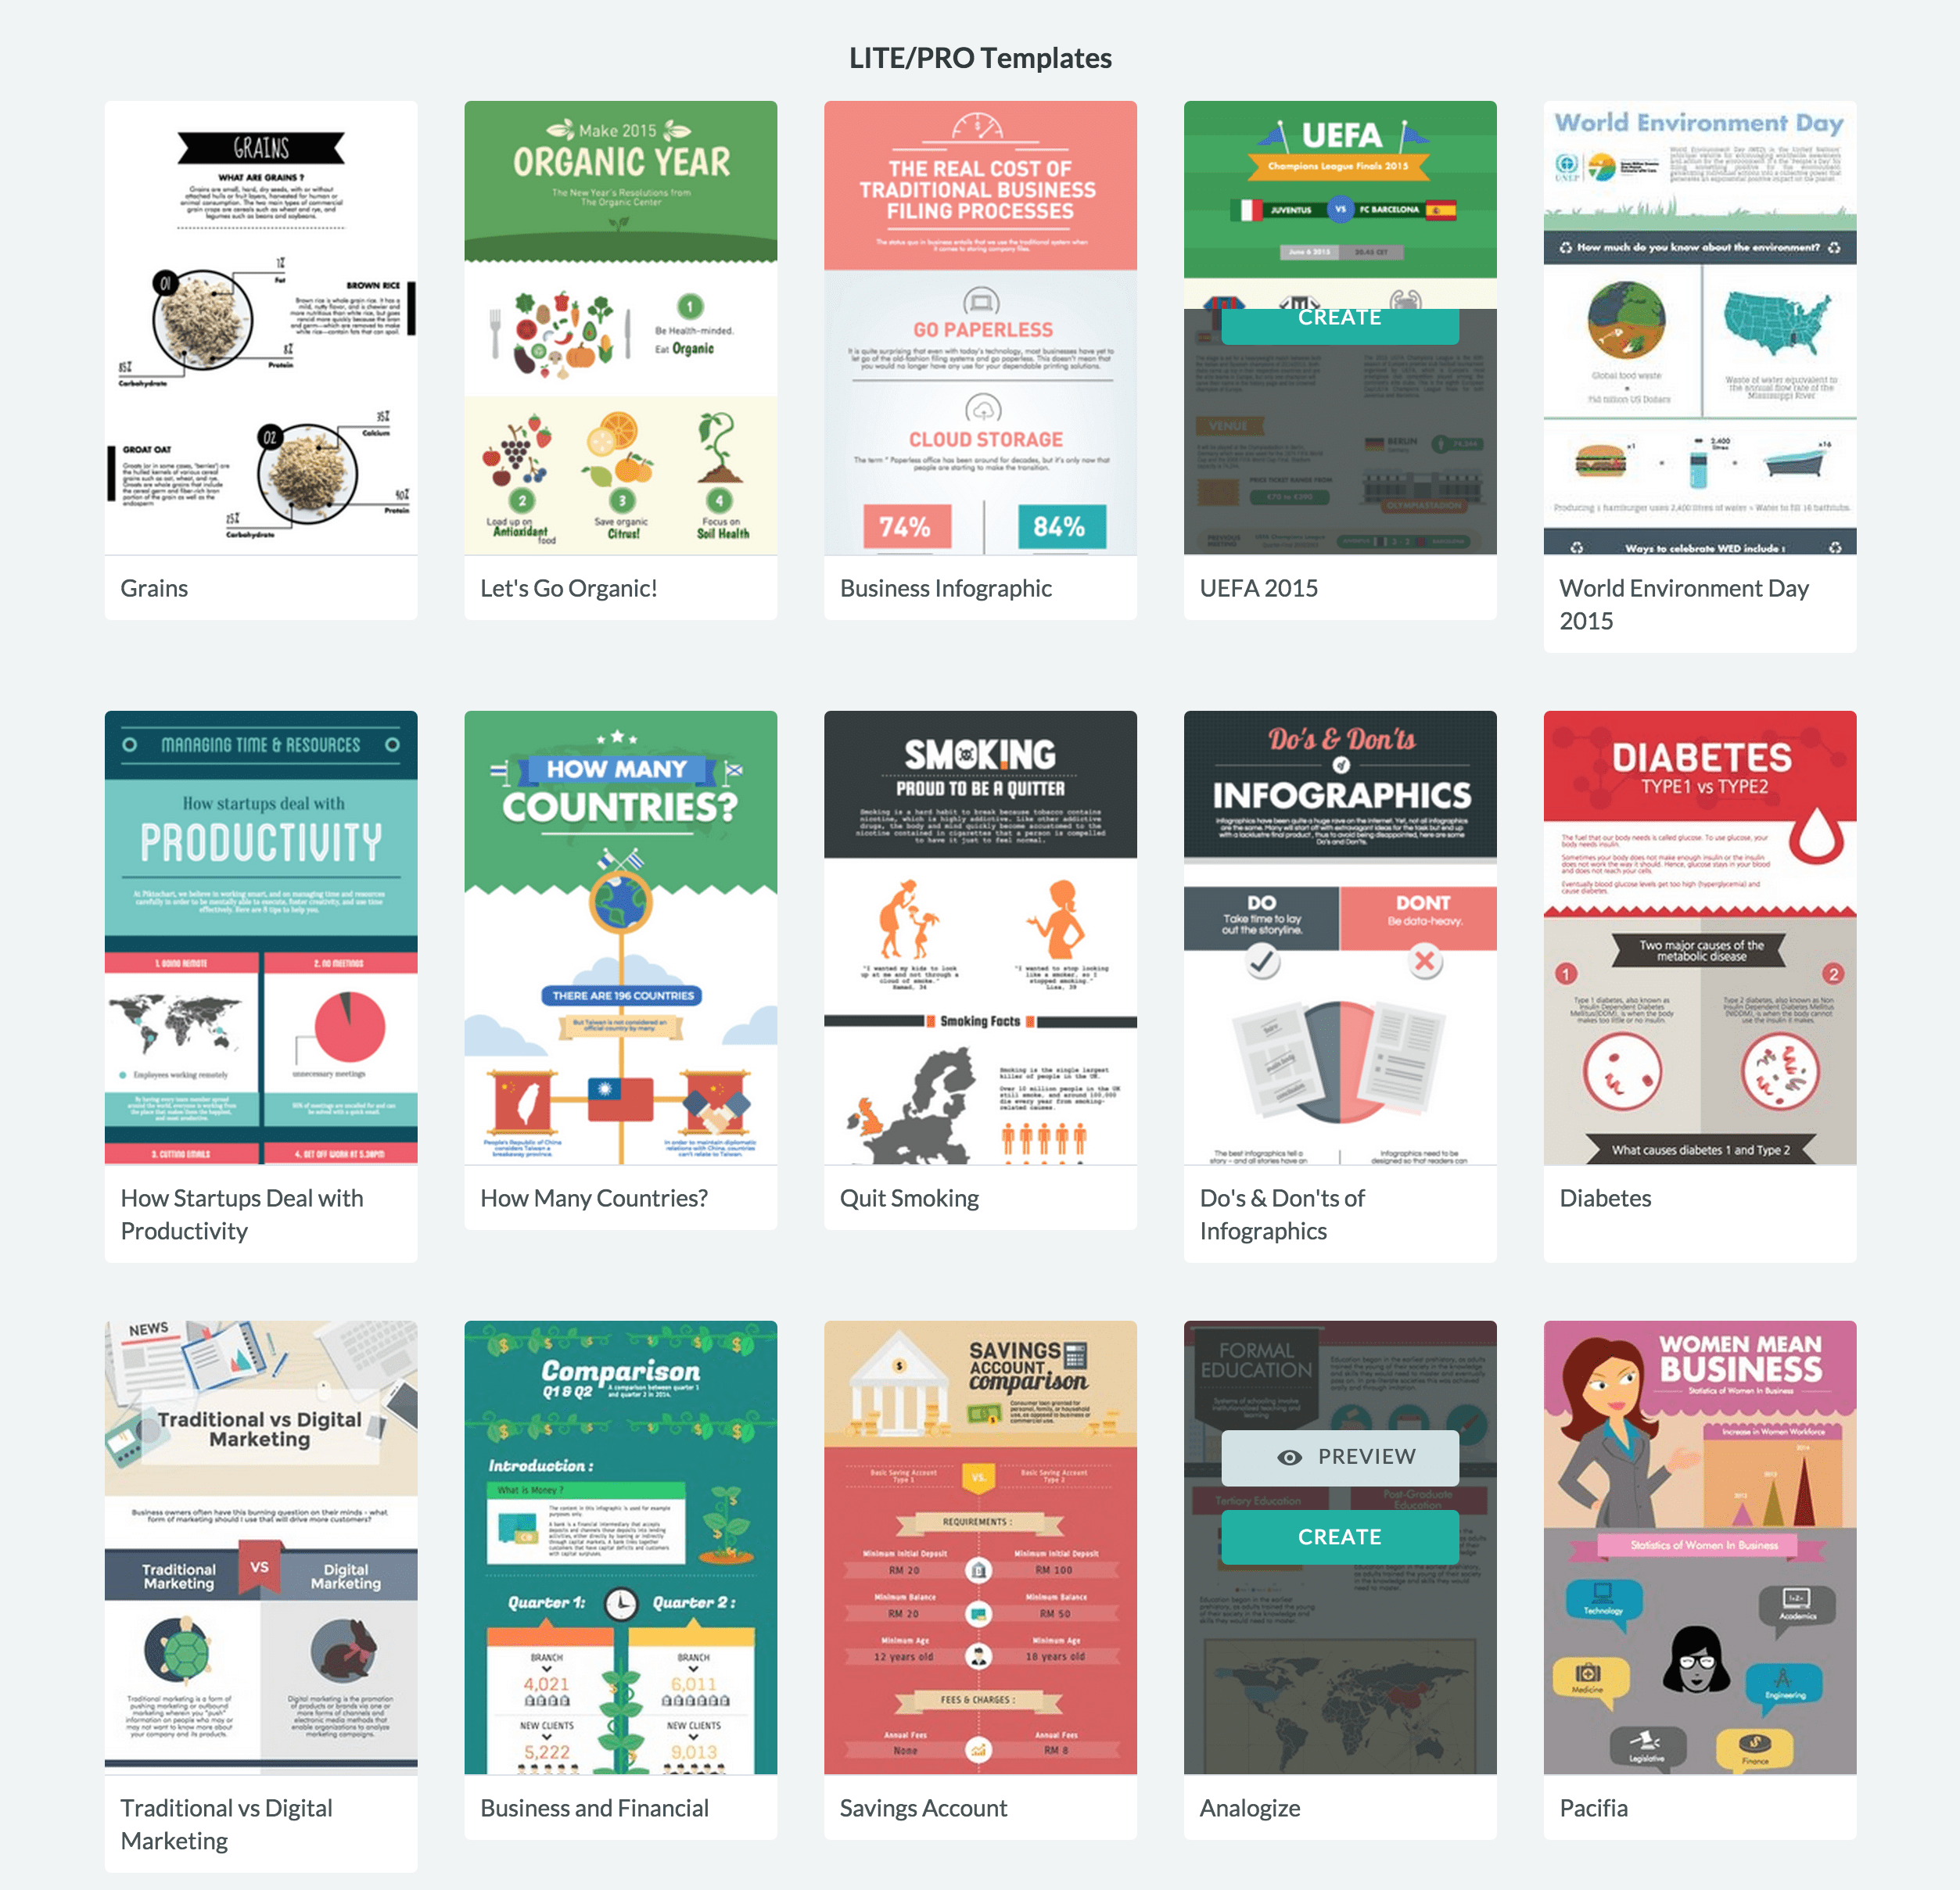 27 Infographic Templates and Vector Kits to Help You Design Your Own Infographic - Content ...